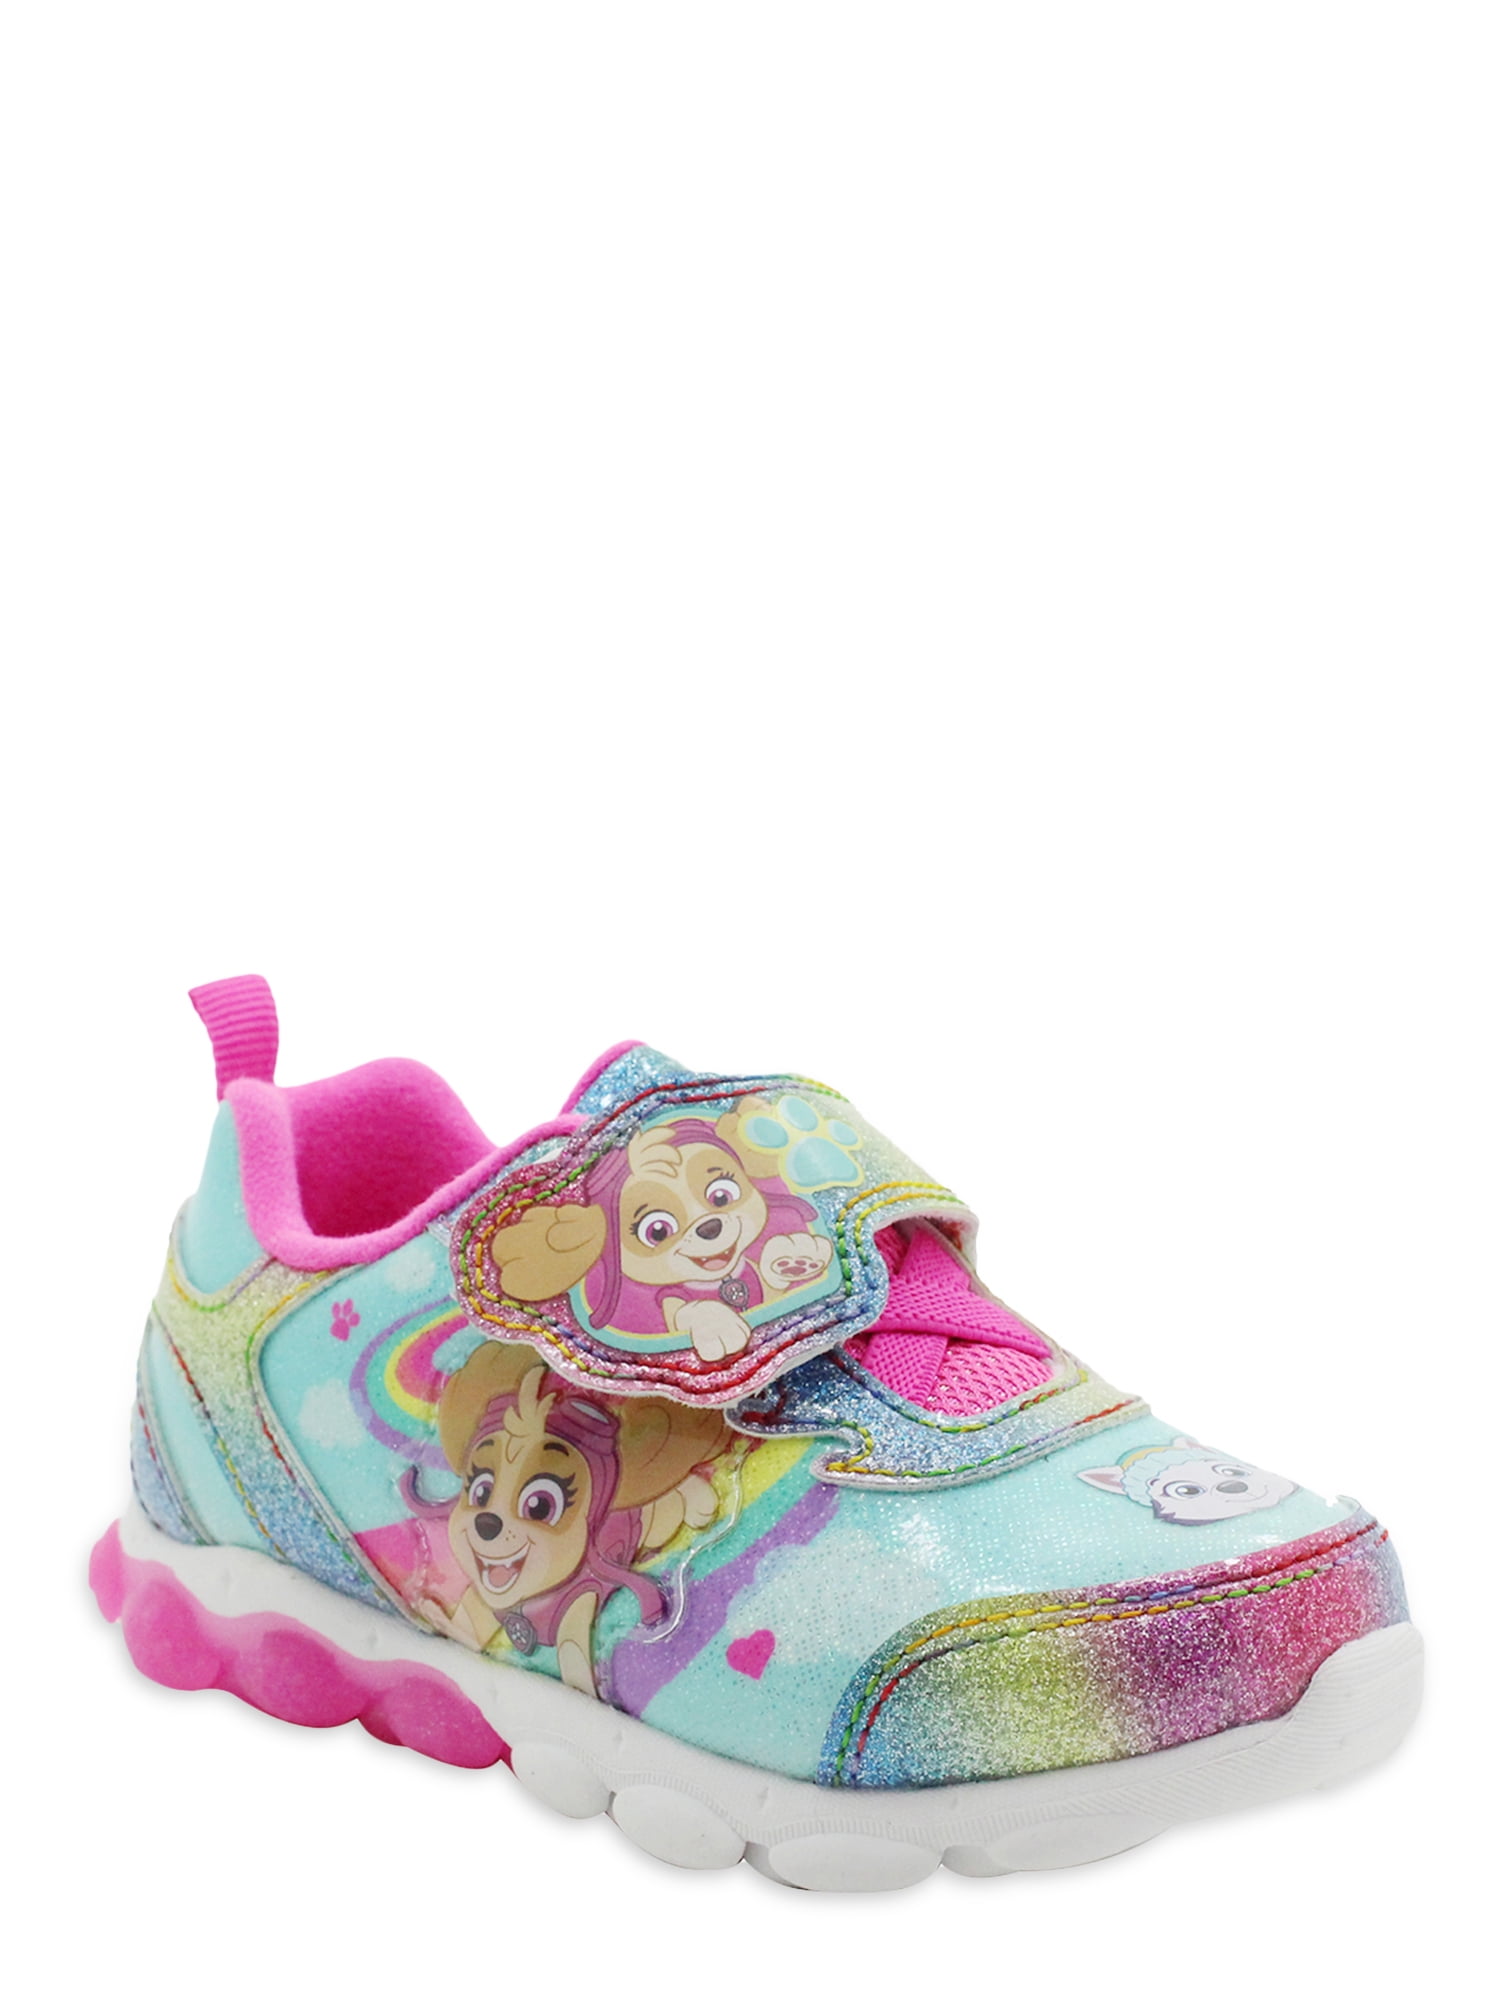 Paw Patrol Girls Canvas Pumps Plimsolls Trainers Slip On Summer Shoes Size Child 5 to 10